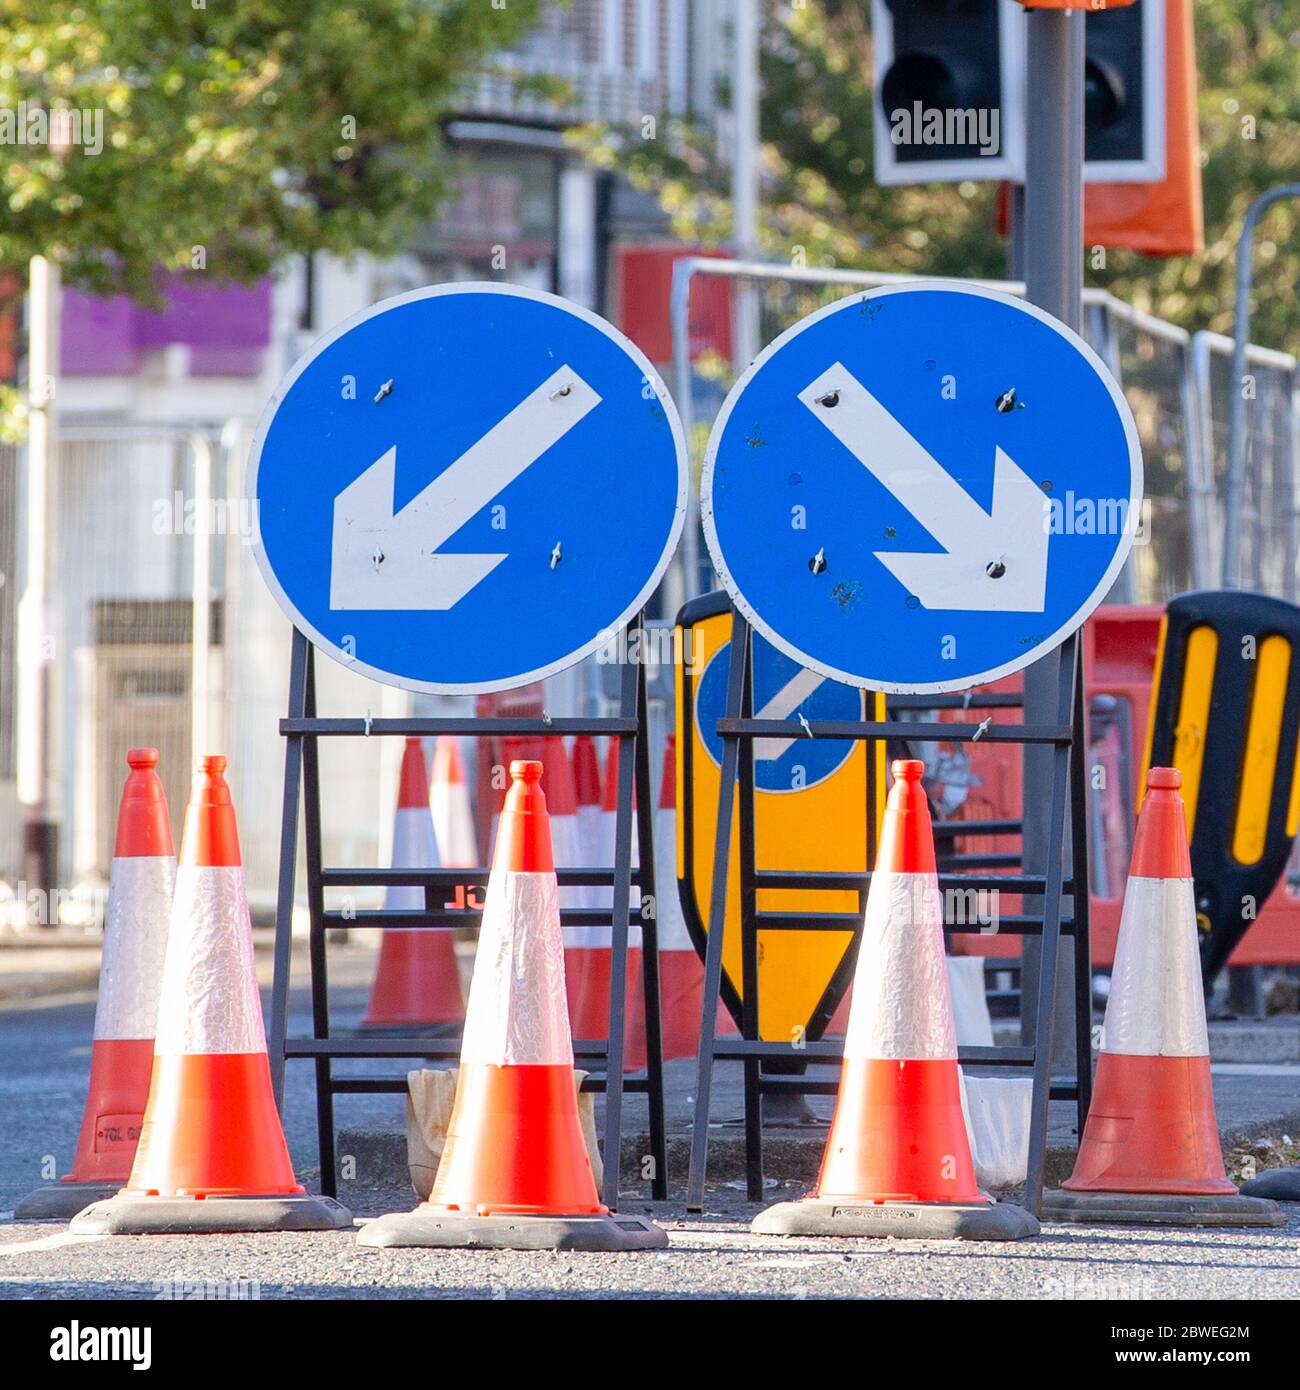 Two Round Blue Road Signs Each Containing a White Arrow Indicating a Mandatory Directional Instruction to Motorists.  Several Traffic cones in Front. Stock Photo